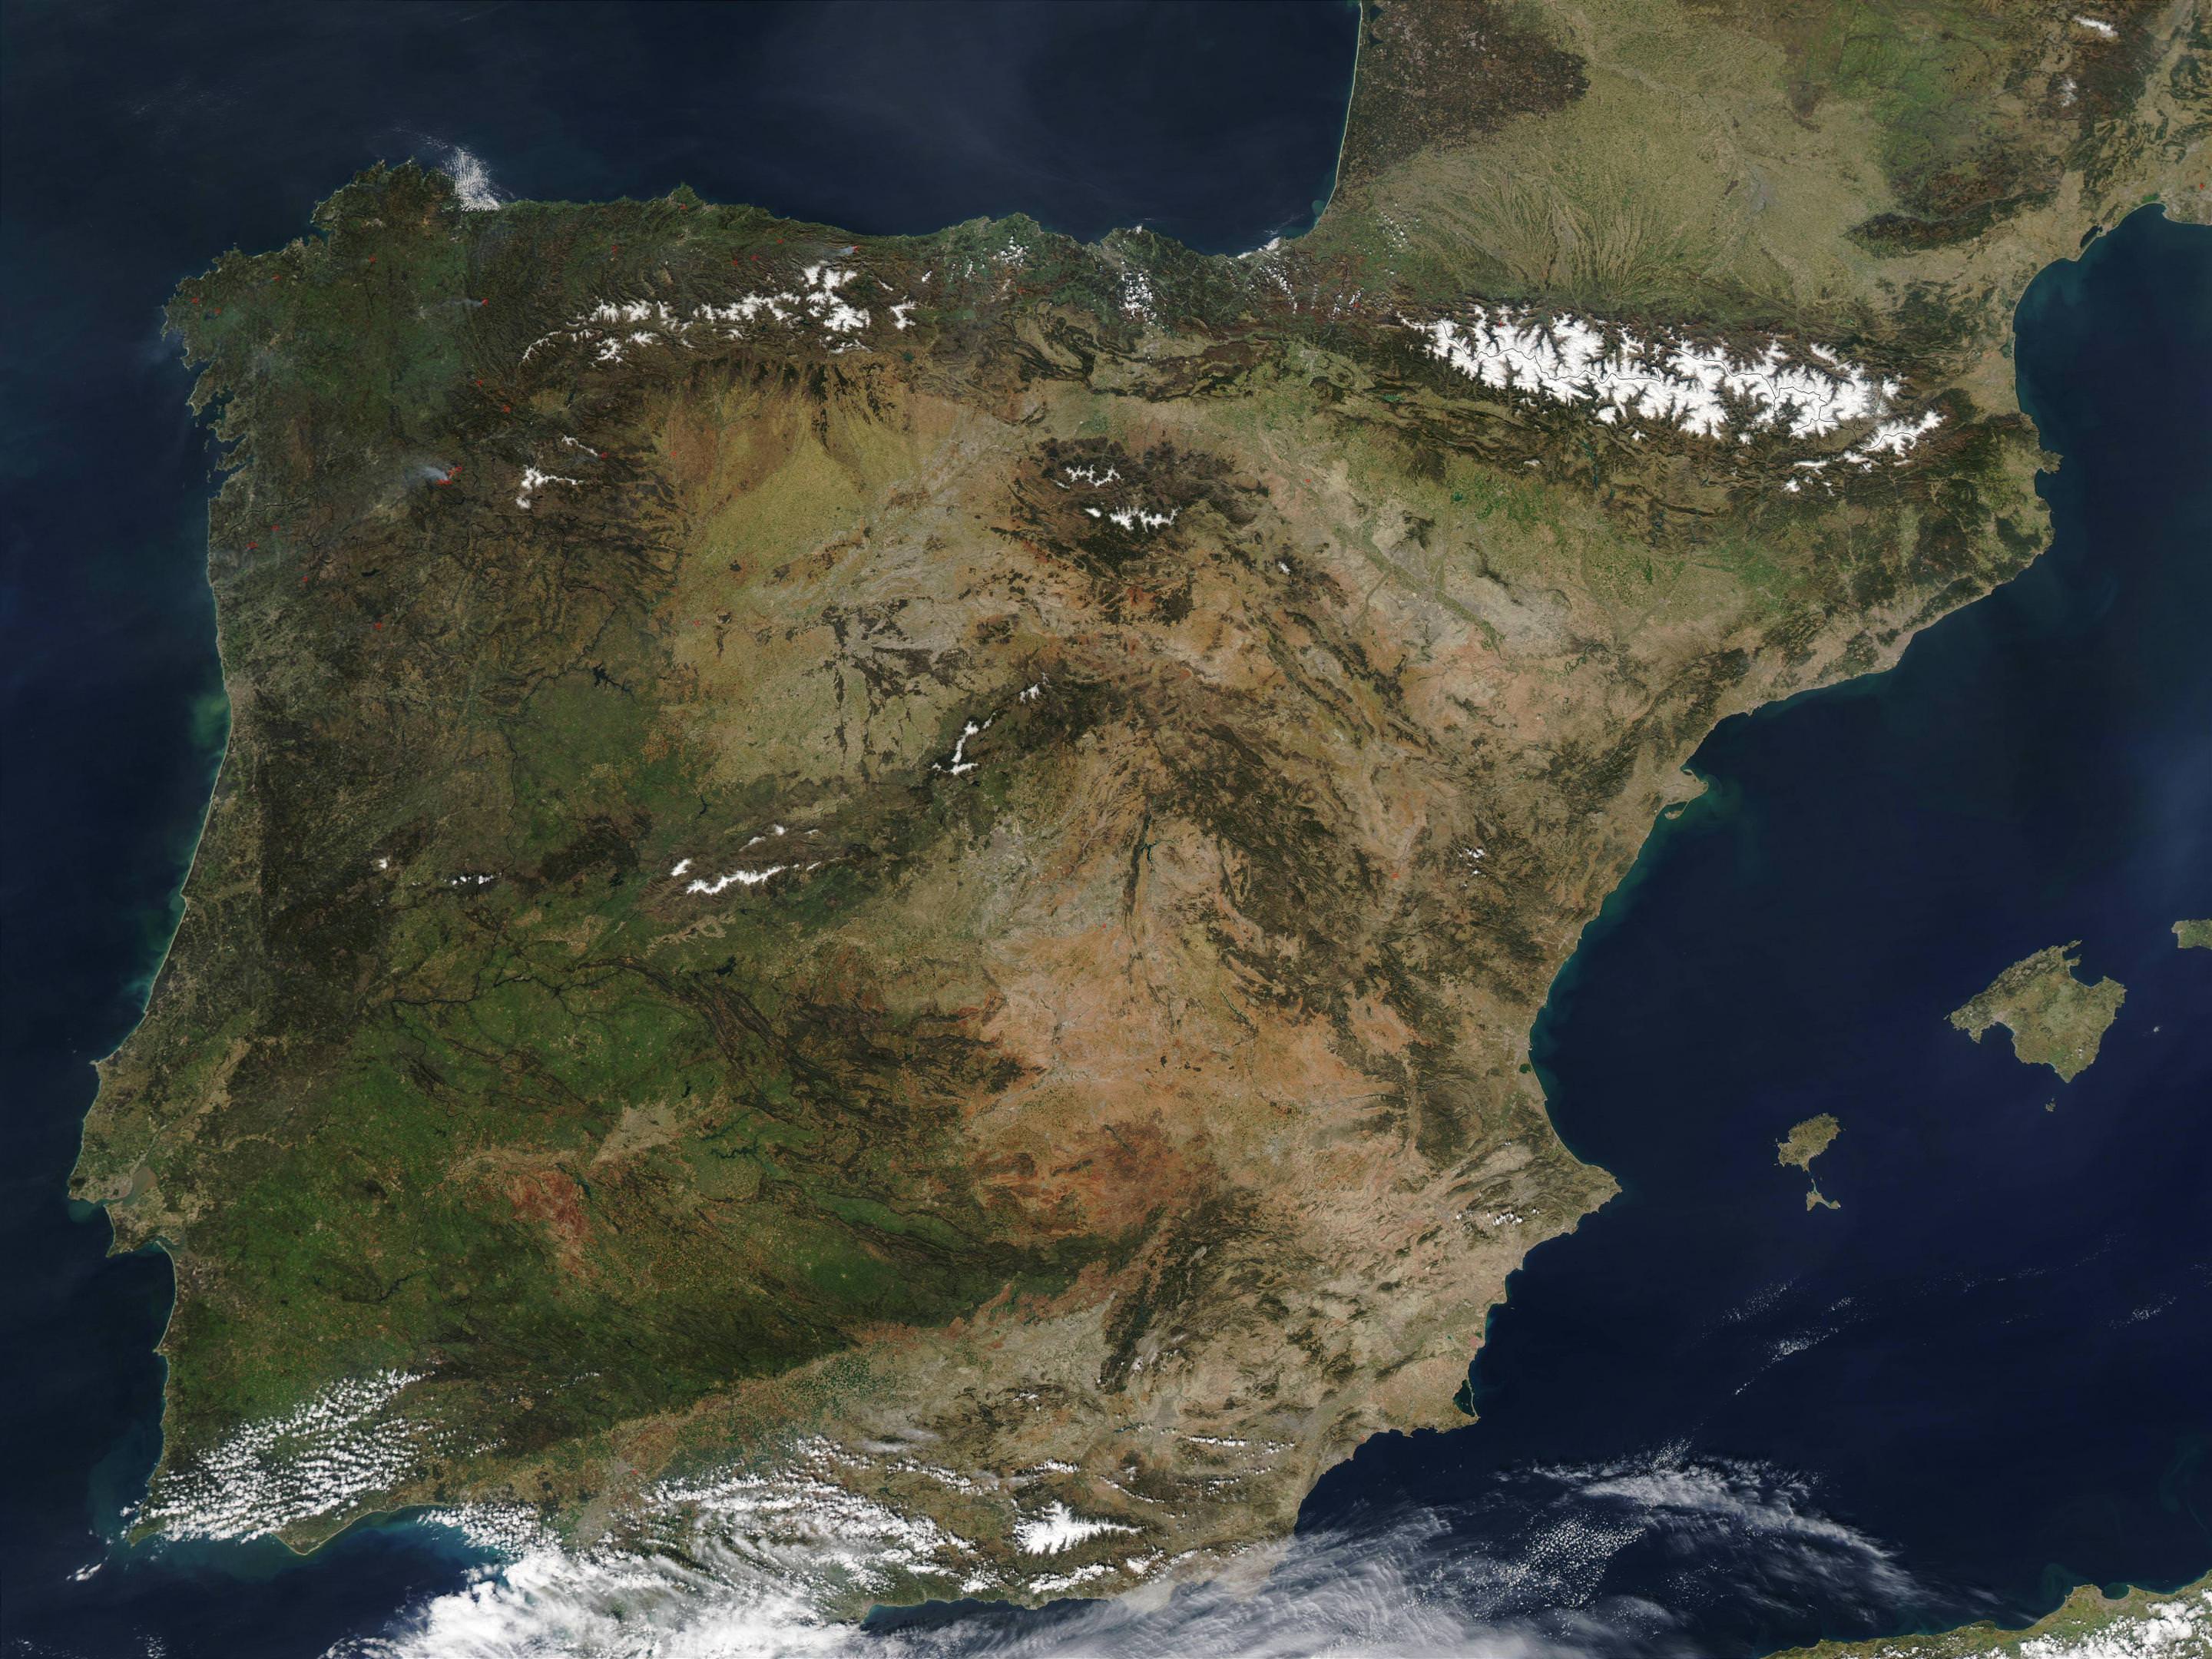 Spain and Portugal Struggle with Extreme Drought